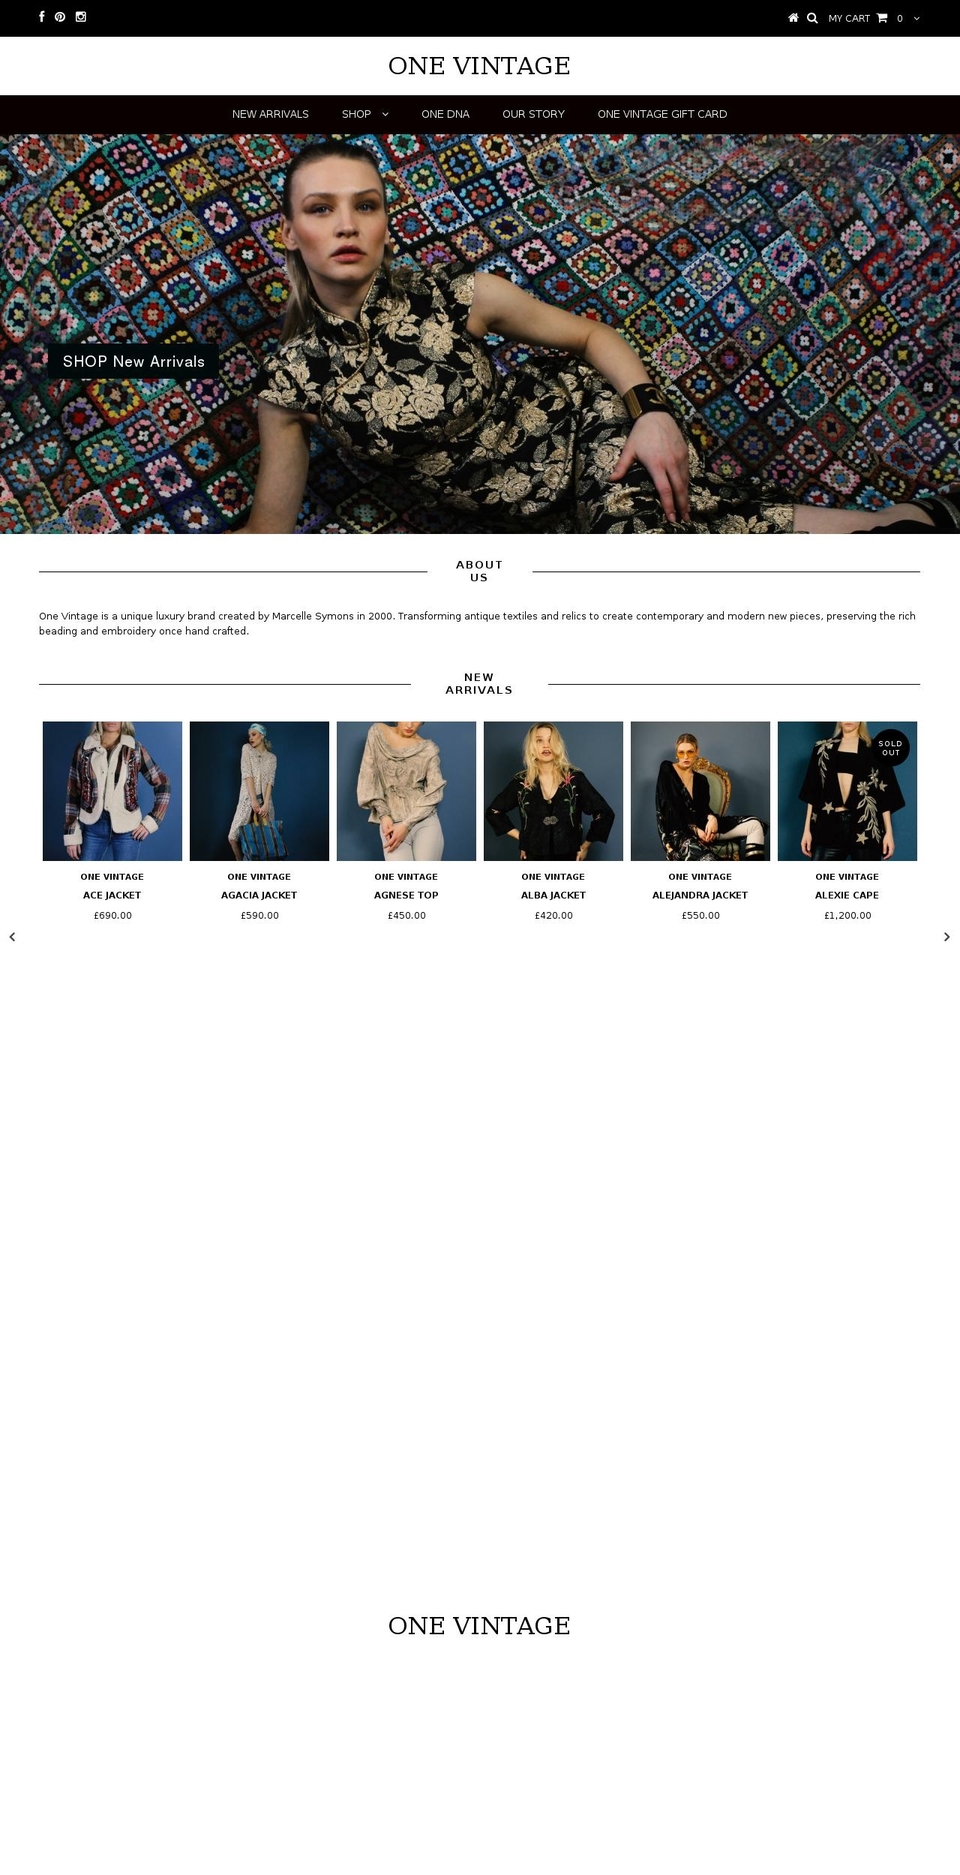 Editions Shopify theme site example onevintagedesigns.com